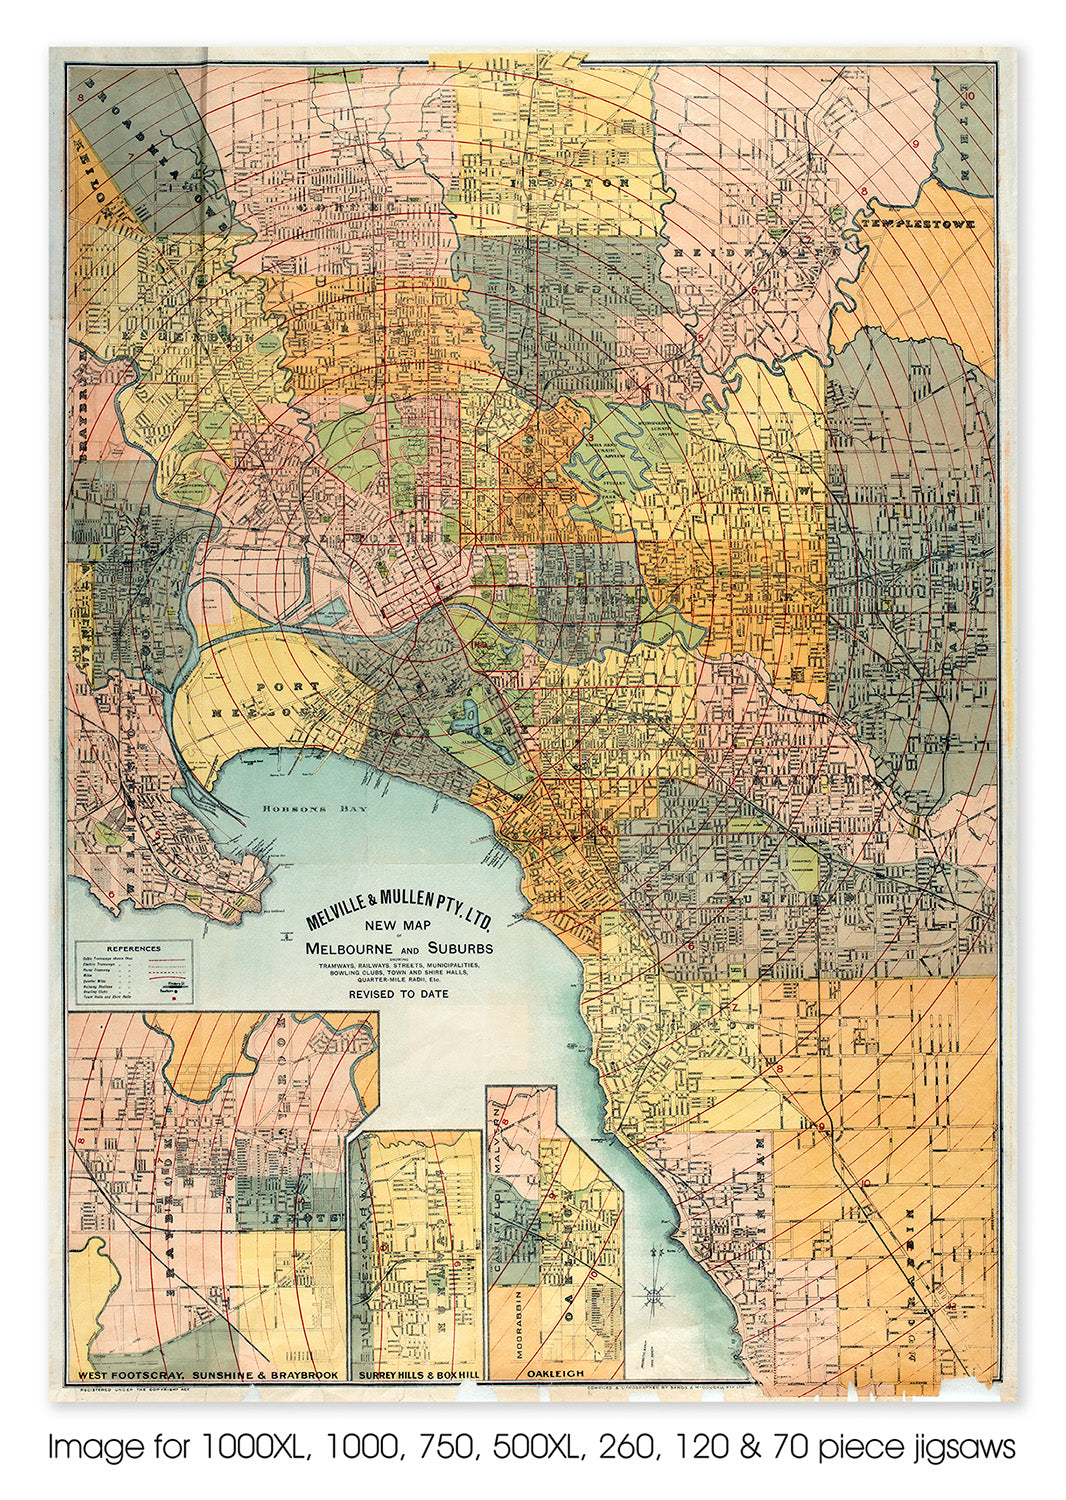 New Map of Melbourne and Suburbs, circa 1909